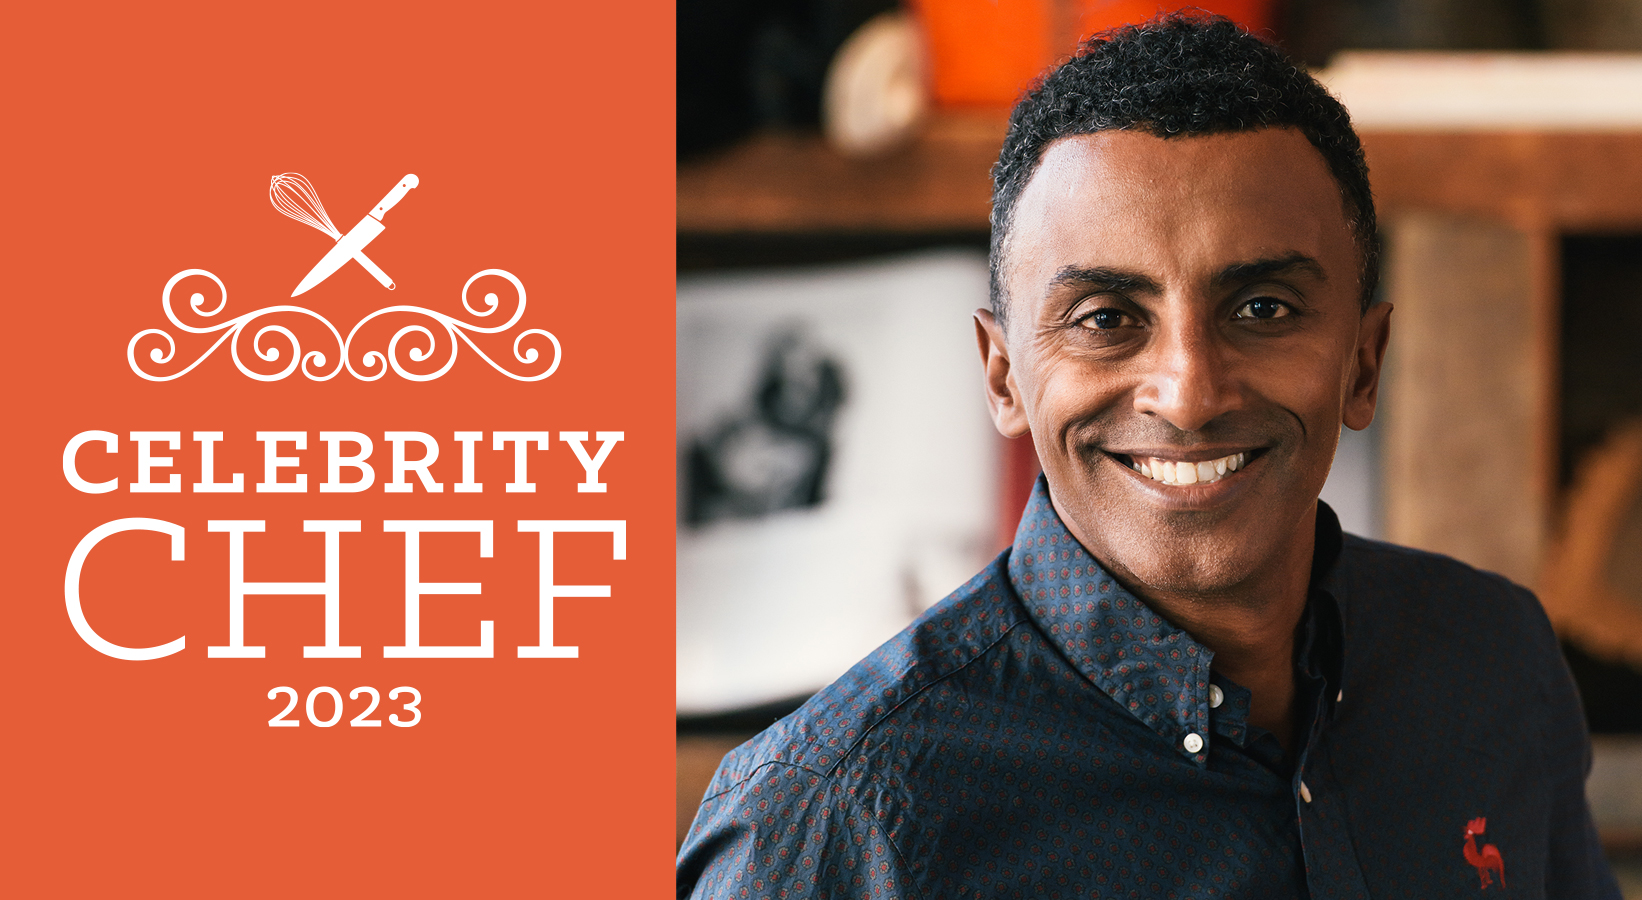 An Evening with Chef Marcus Samuelsson – Celebrity Chef 2023